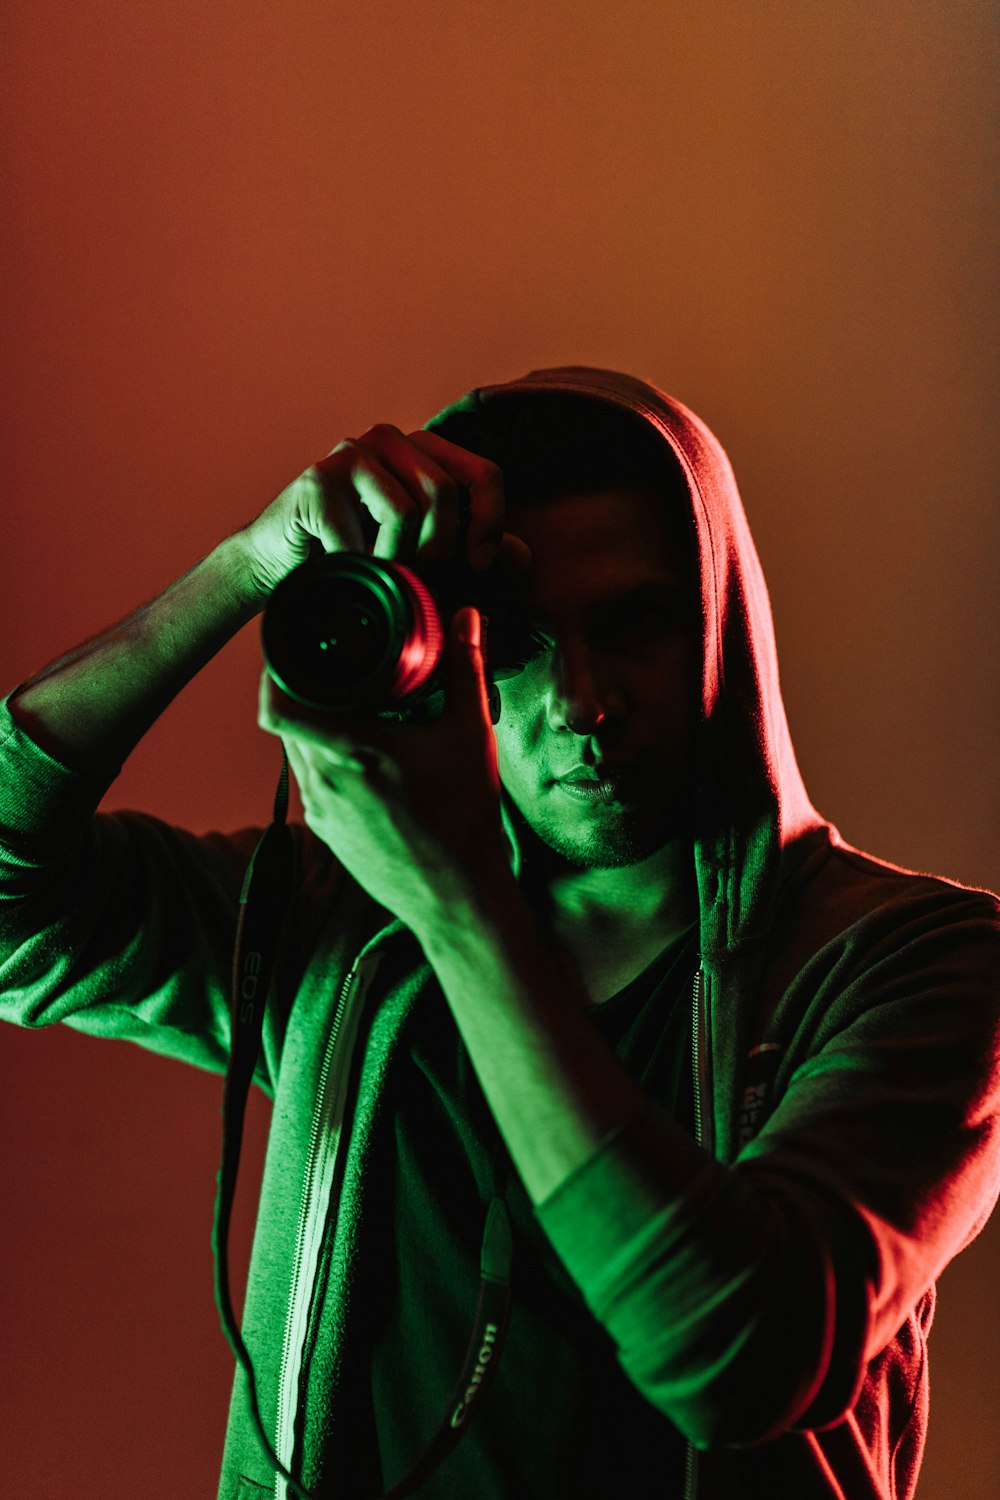 man in hooded jacket with camera by his face